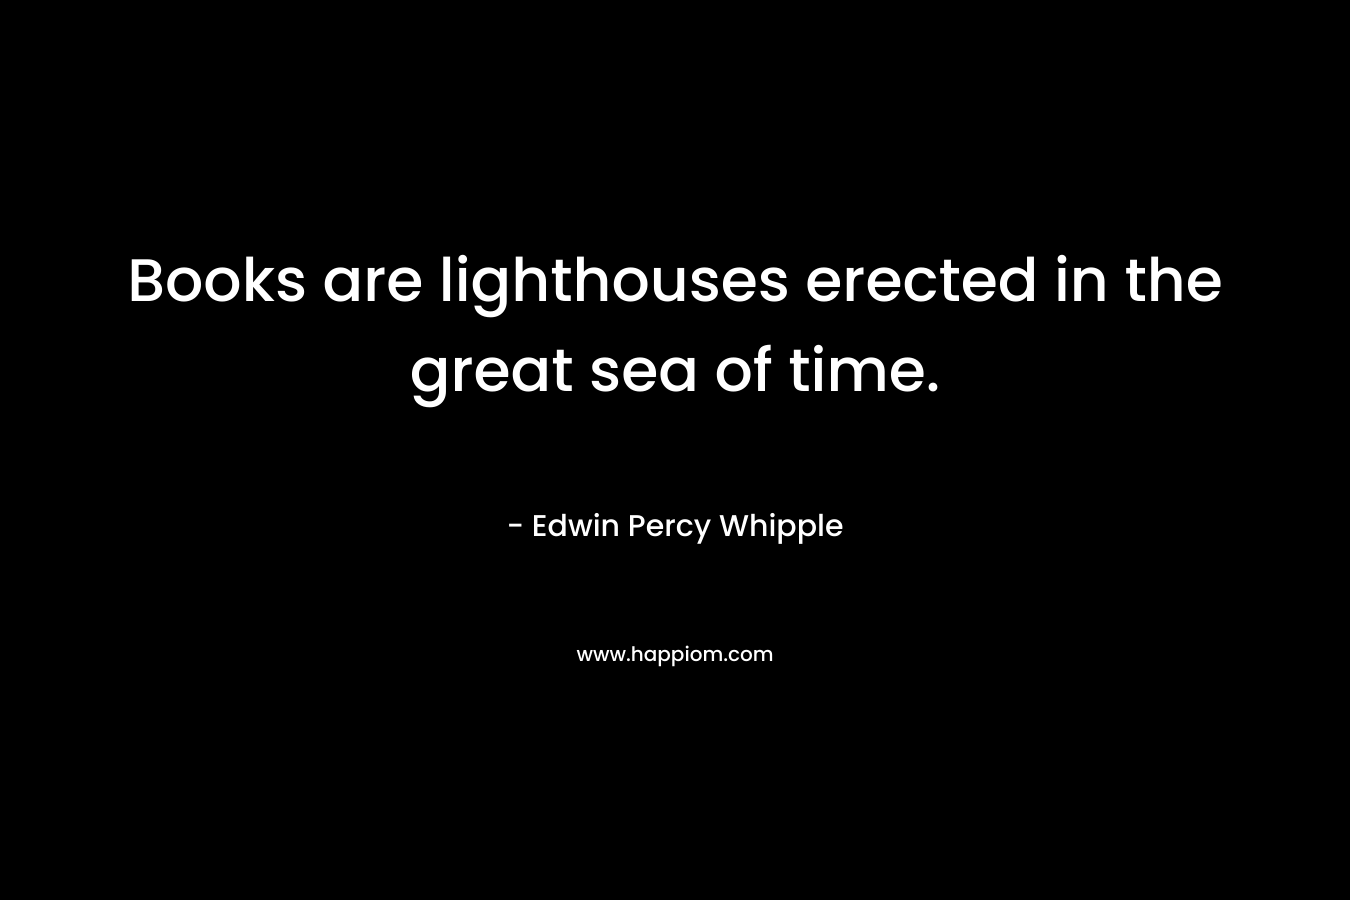 Books are lighthouses erected in the great sea of time. – Edwin Percy Whipple